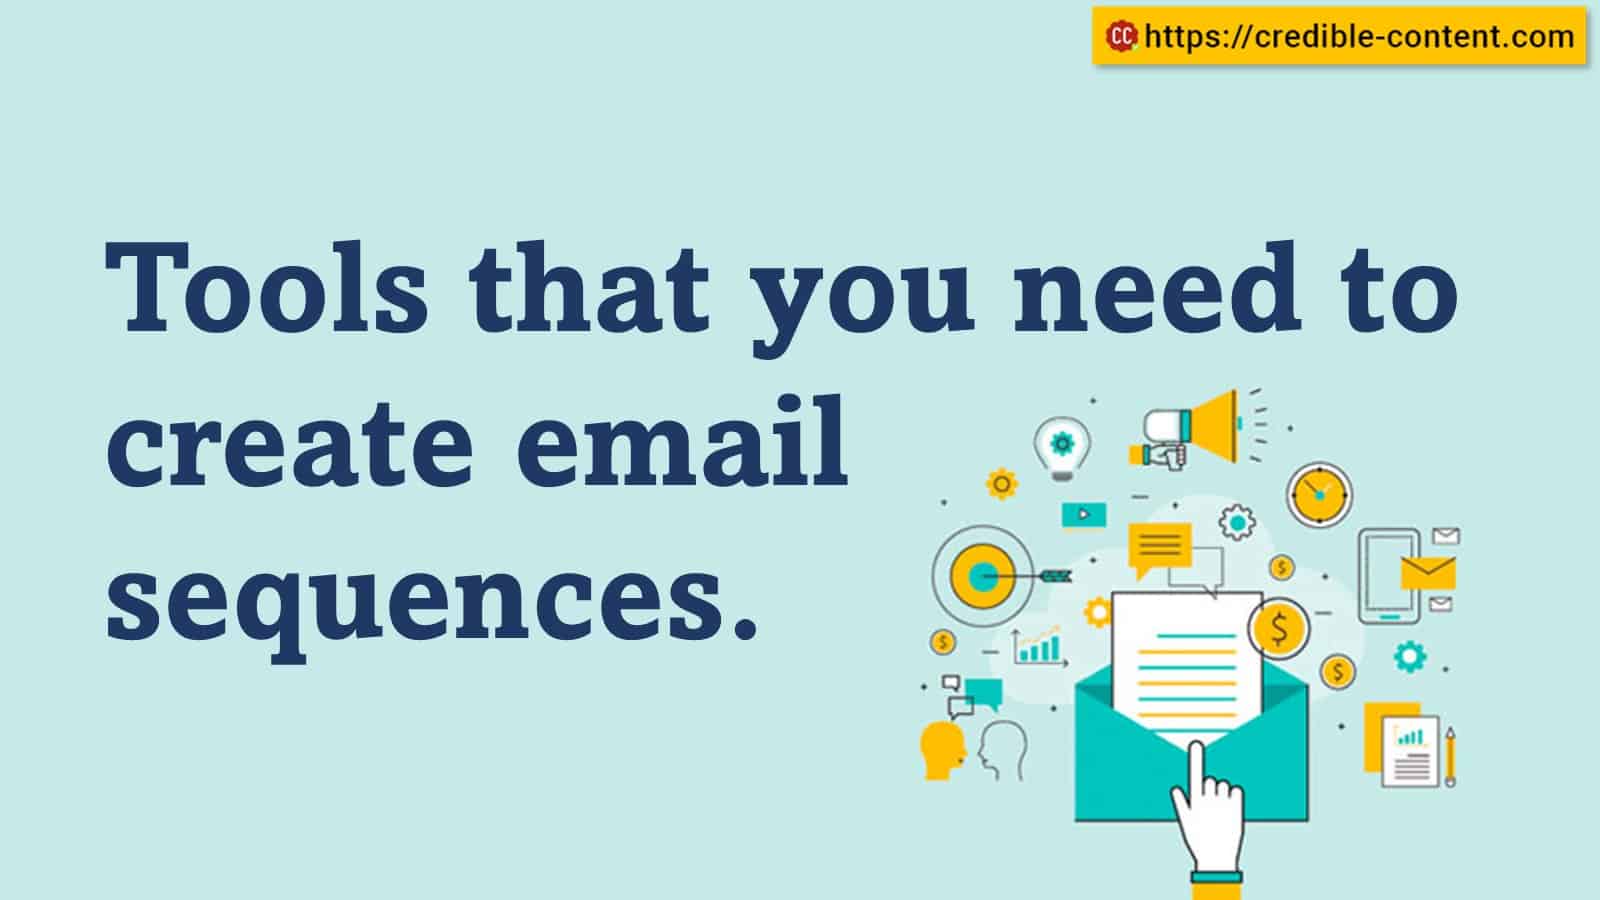 Tools that you need to create email sequences